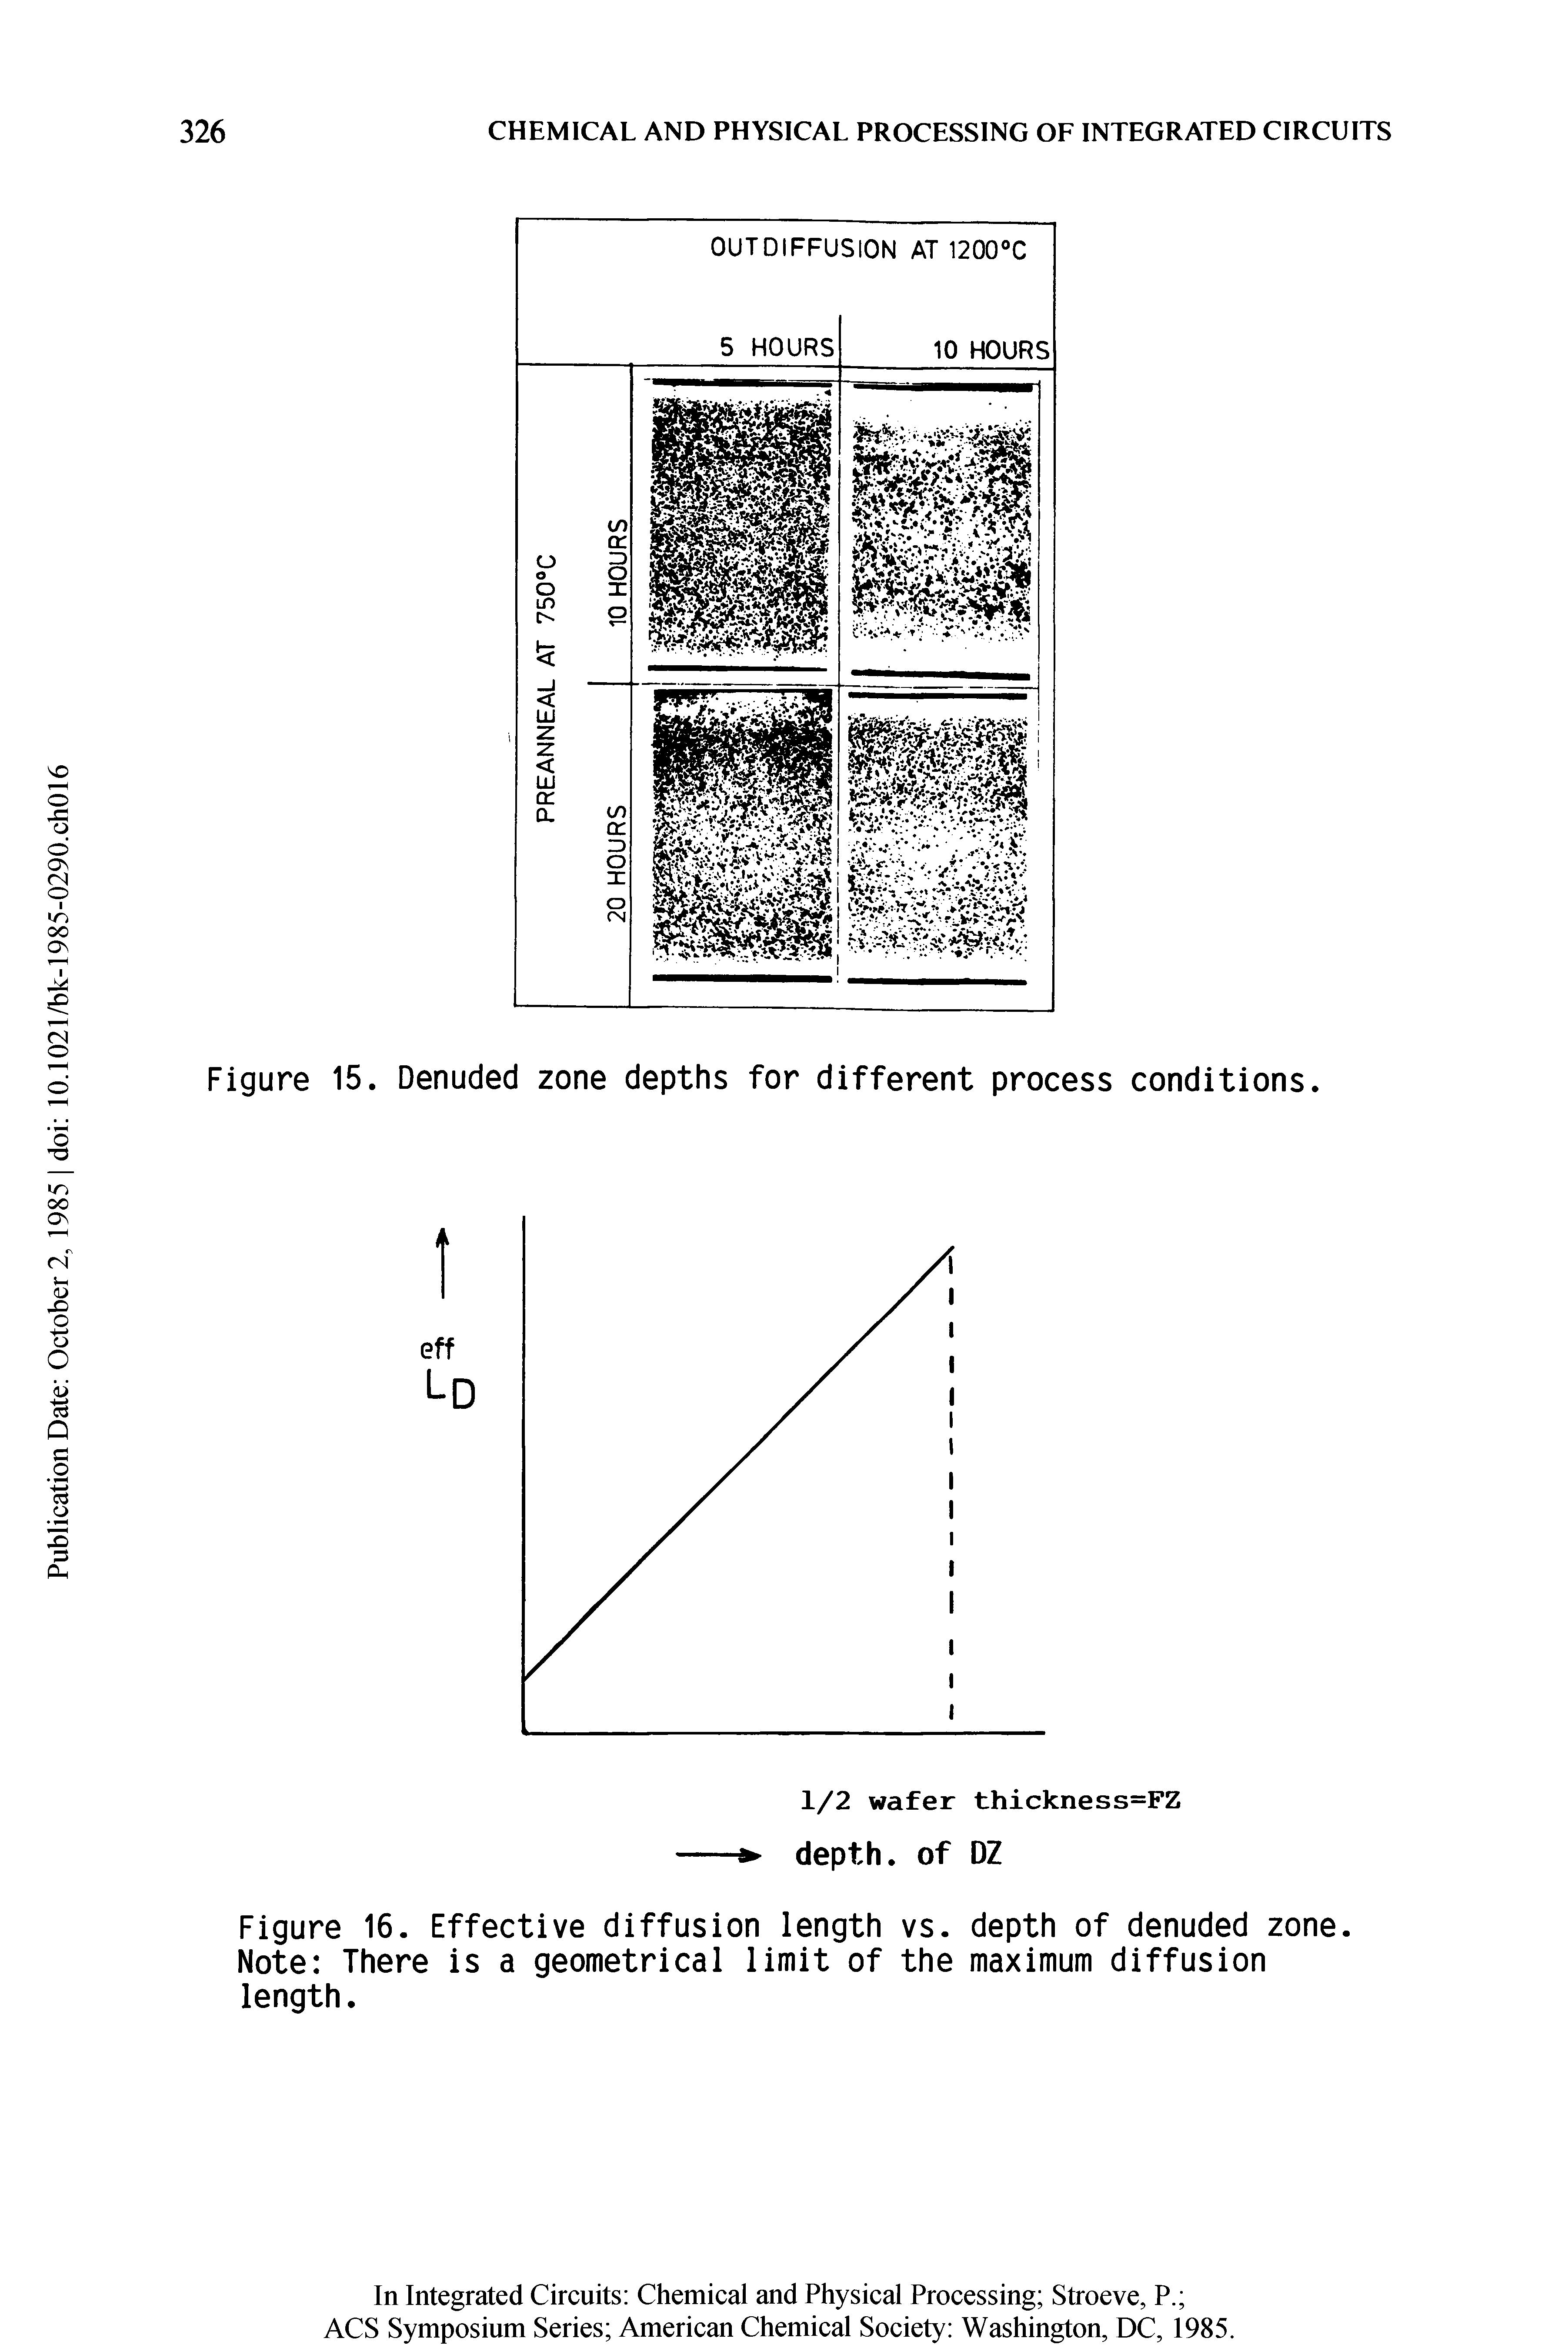 Figure 15. Denuded zone depths for different process conditions.